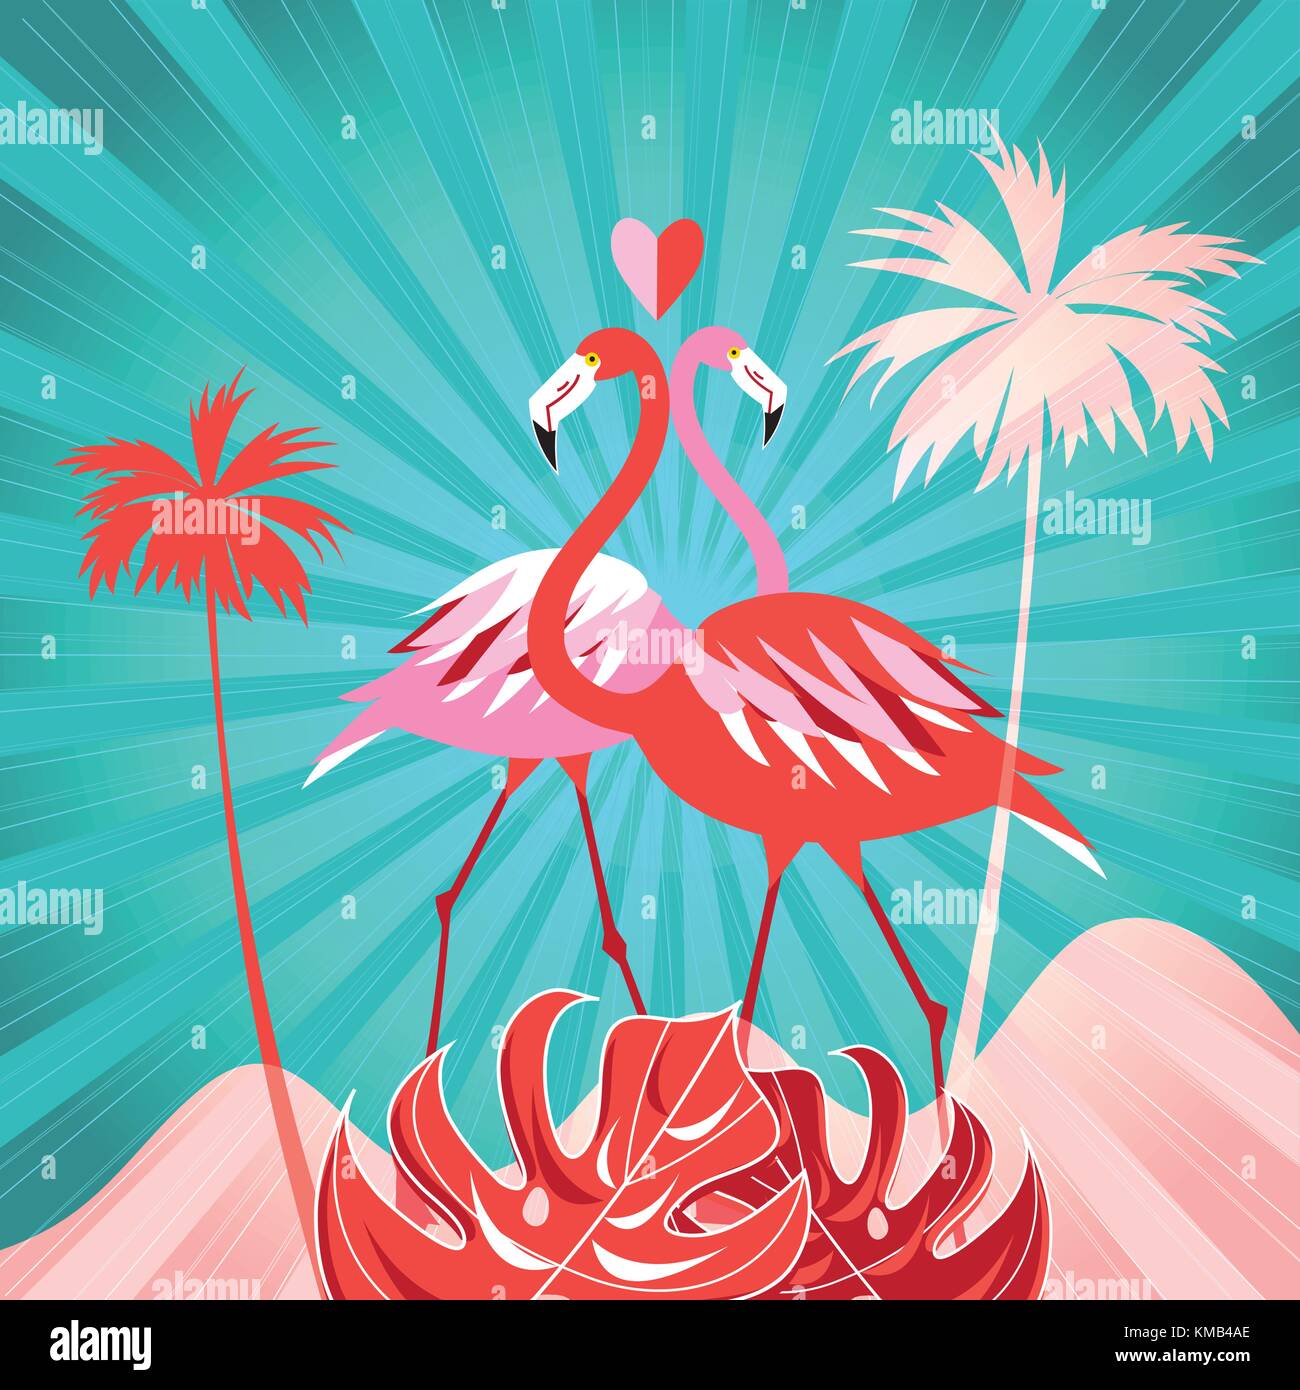 Tropical illustration with palm trees and flamingos on a background with rays of sun Stock Vector